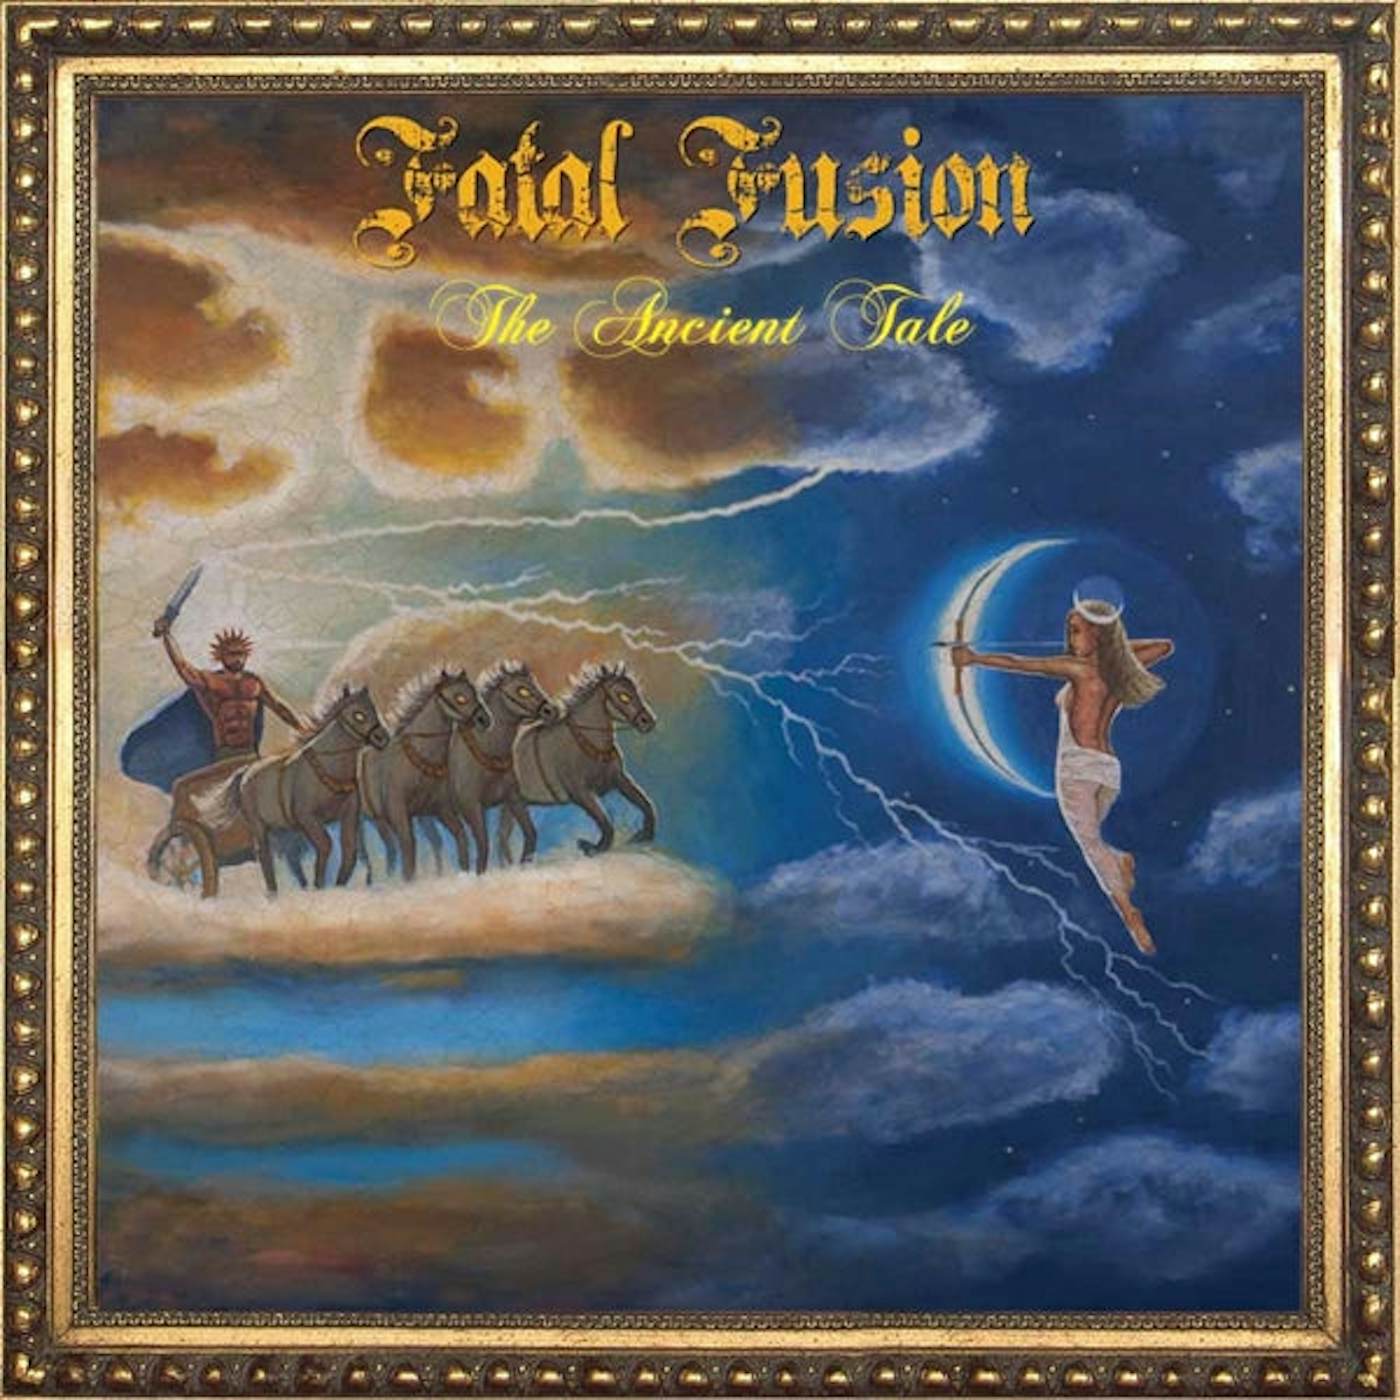 Fatal Fusion CD - The Ancient Tale